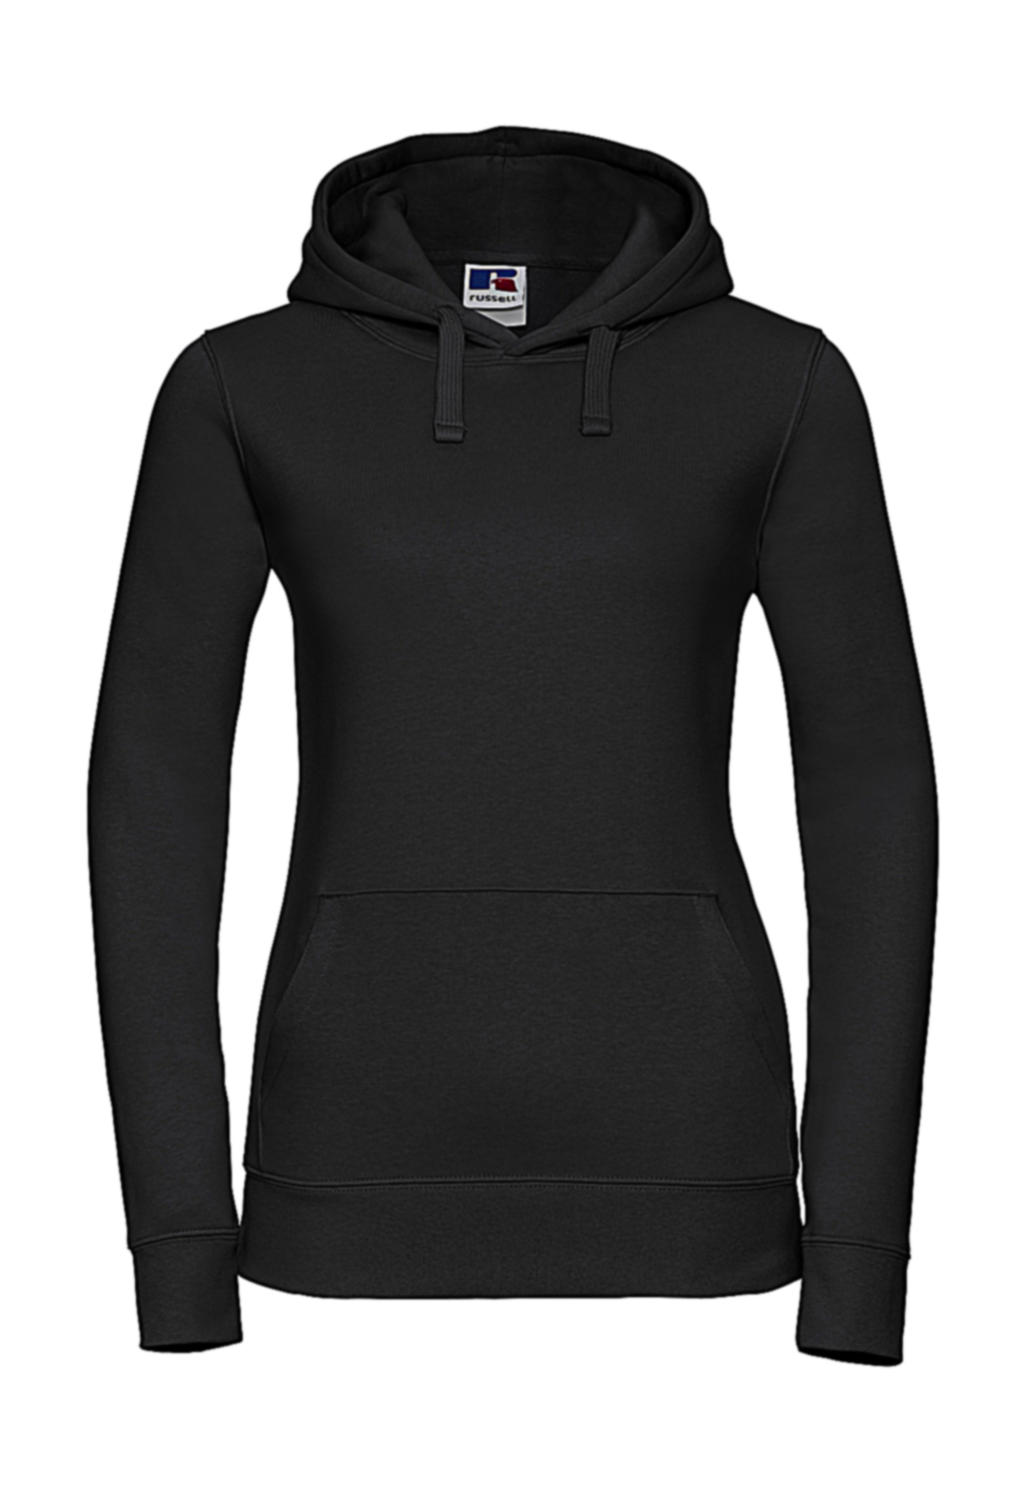  Ladies Authentic Hooded Sweat in Farbe Black